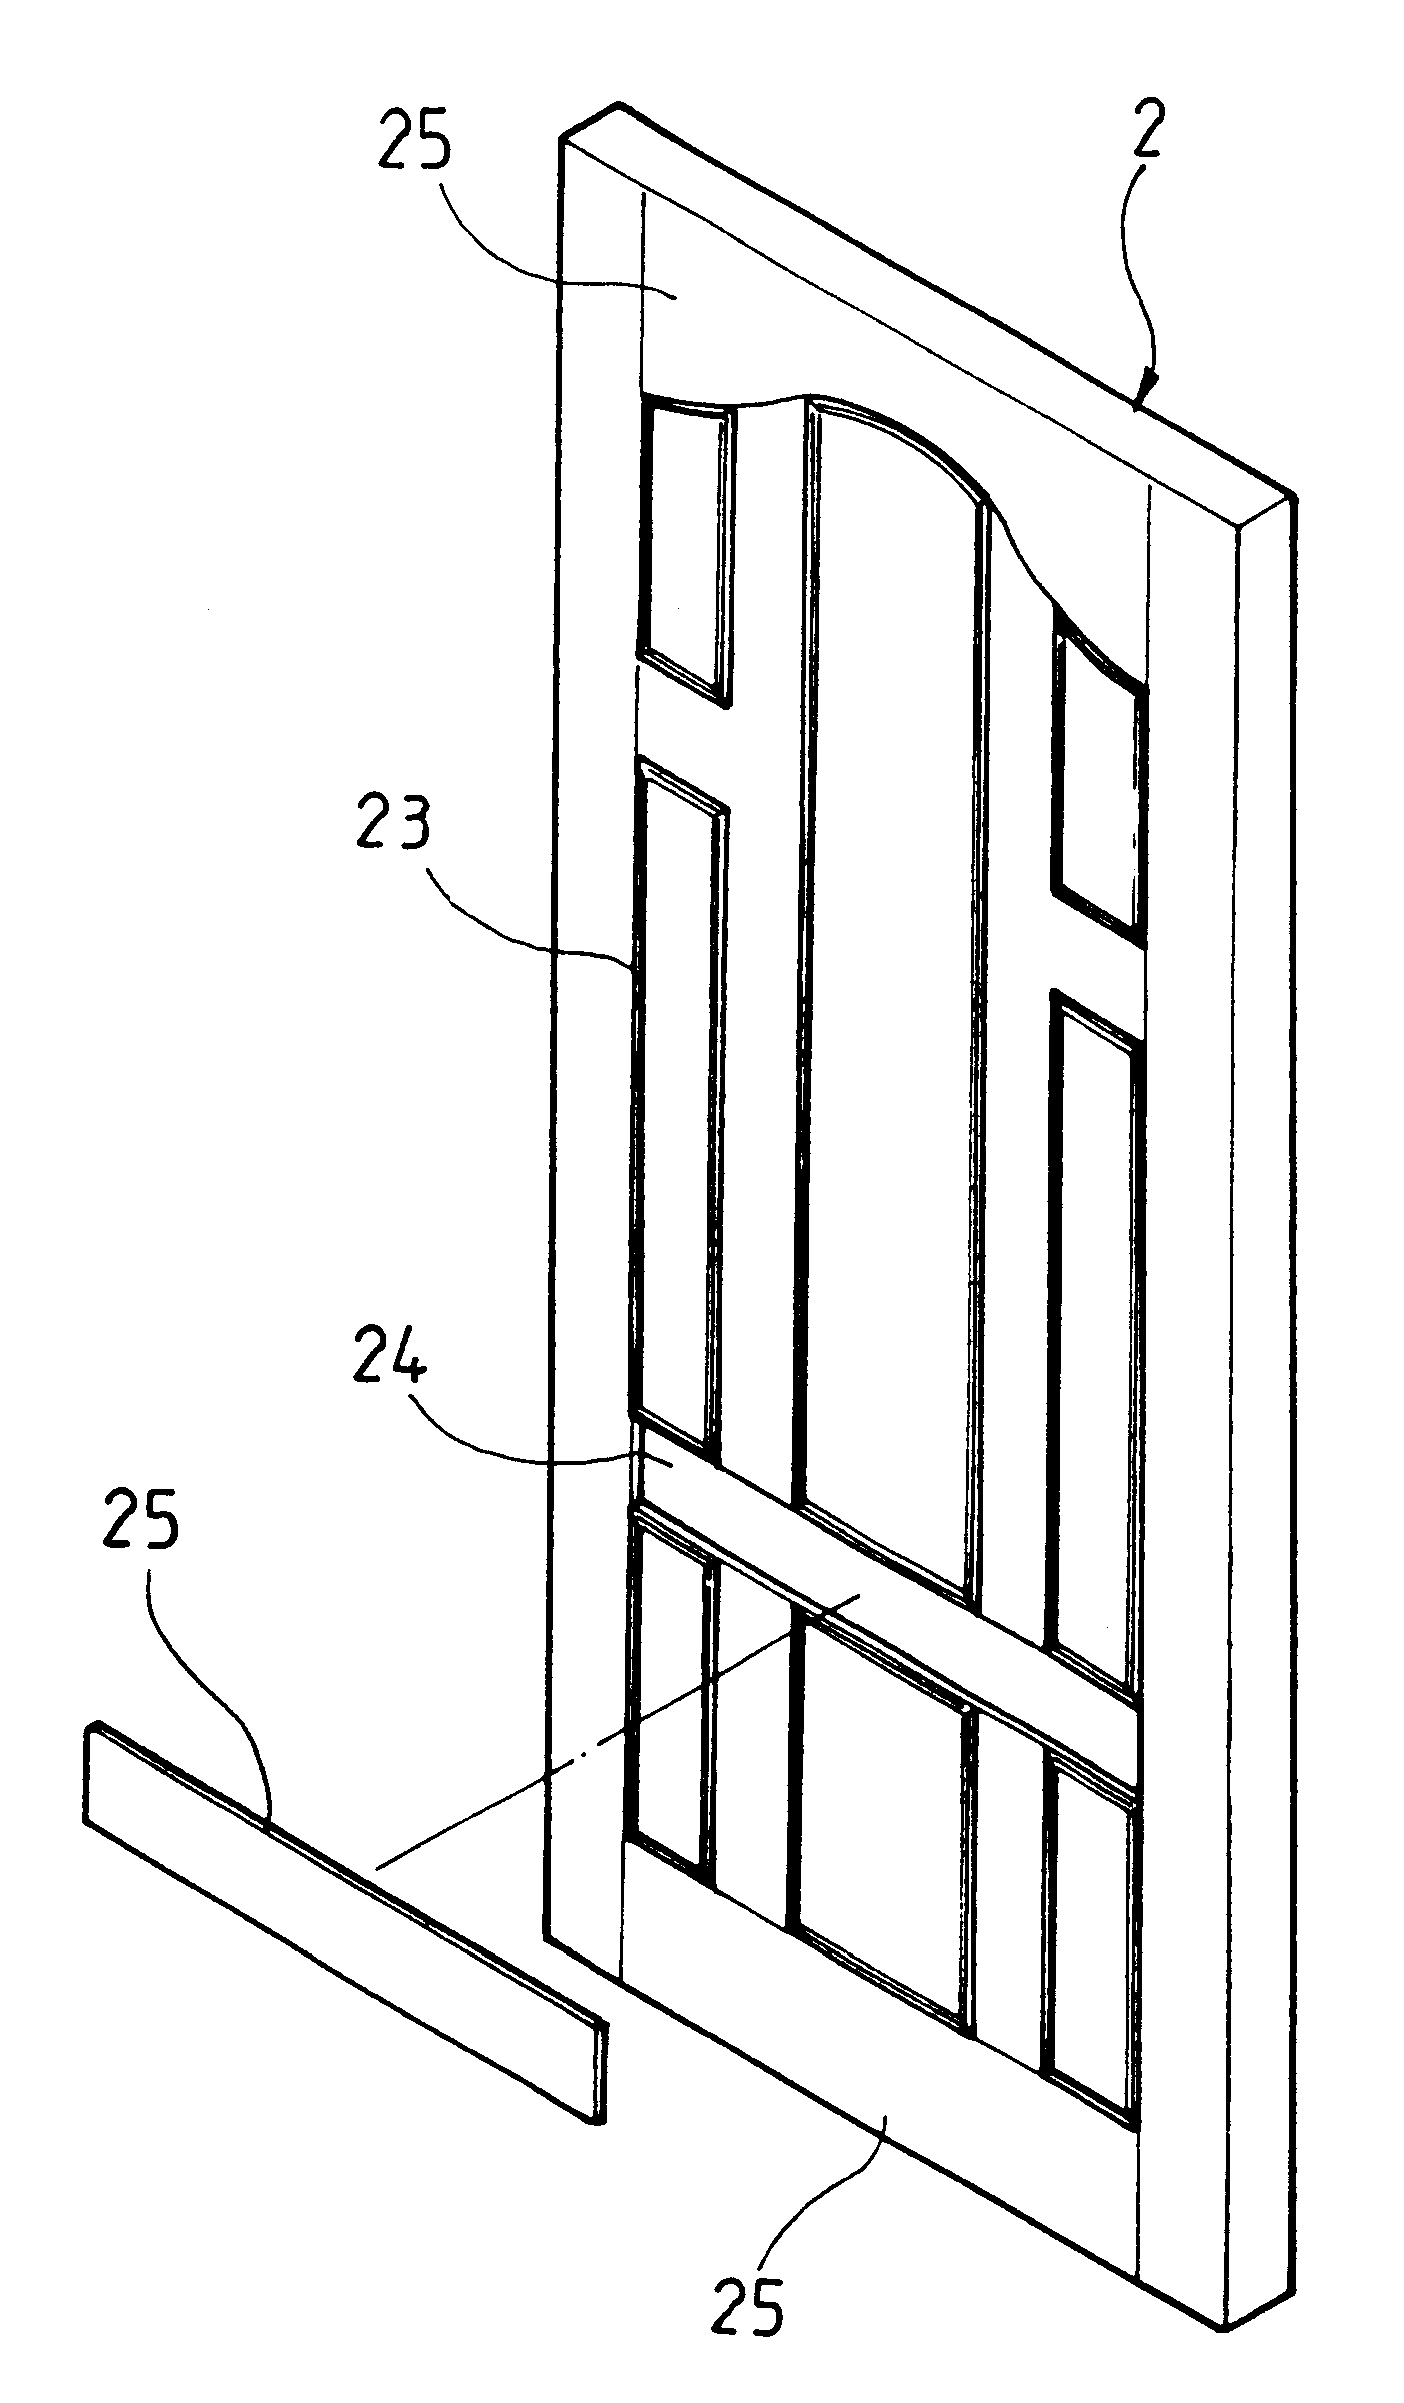 Method of manufacturing carved wooden doors